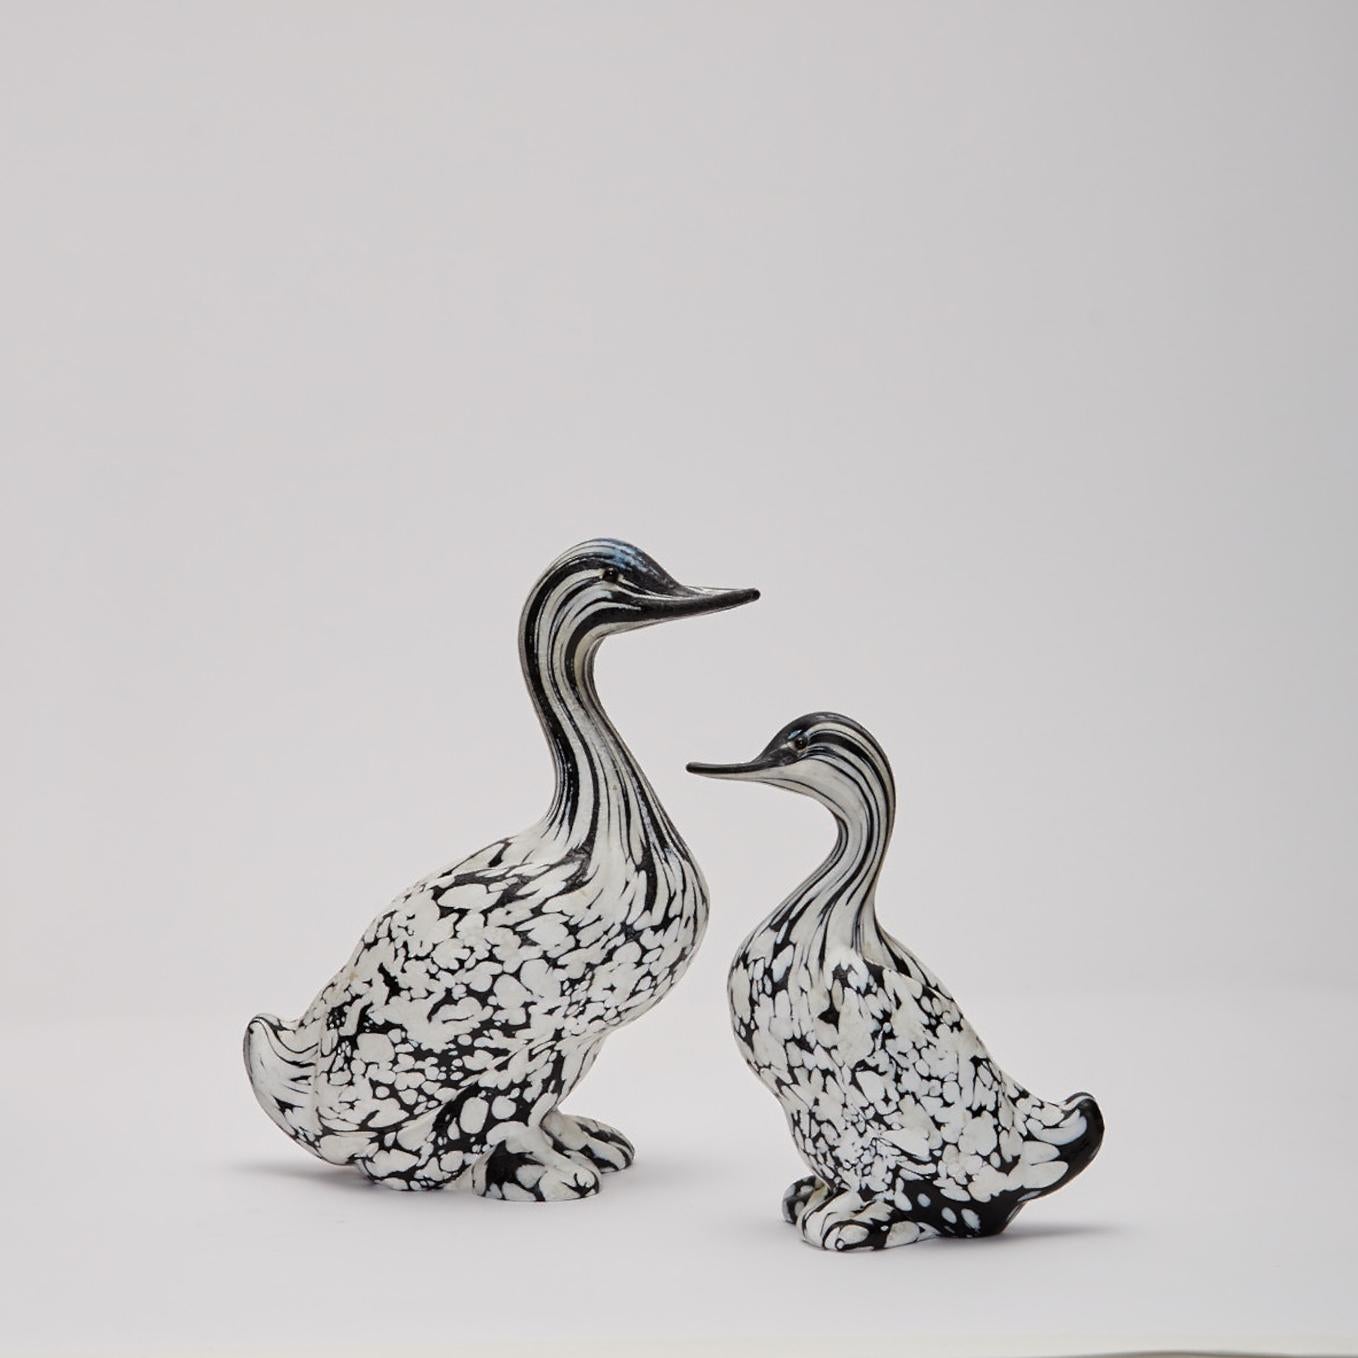 A pair of black and white animal sculptures by Archimede Seguso (1909-1999) Italy made circa 1970 comprising of two large ducks, in solid opaque glass.
Archimede Seguso was born on the island of Murano. His families glass artisan heritage dates back